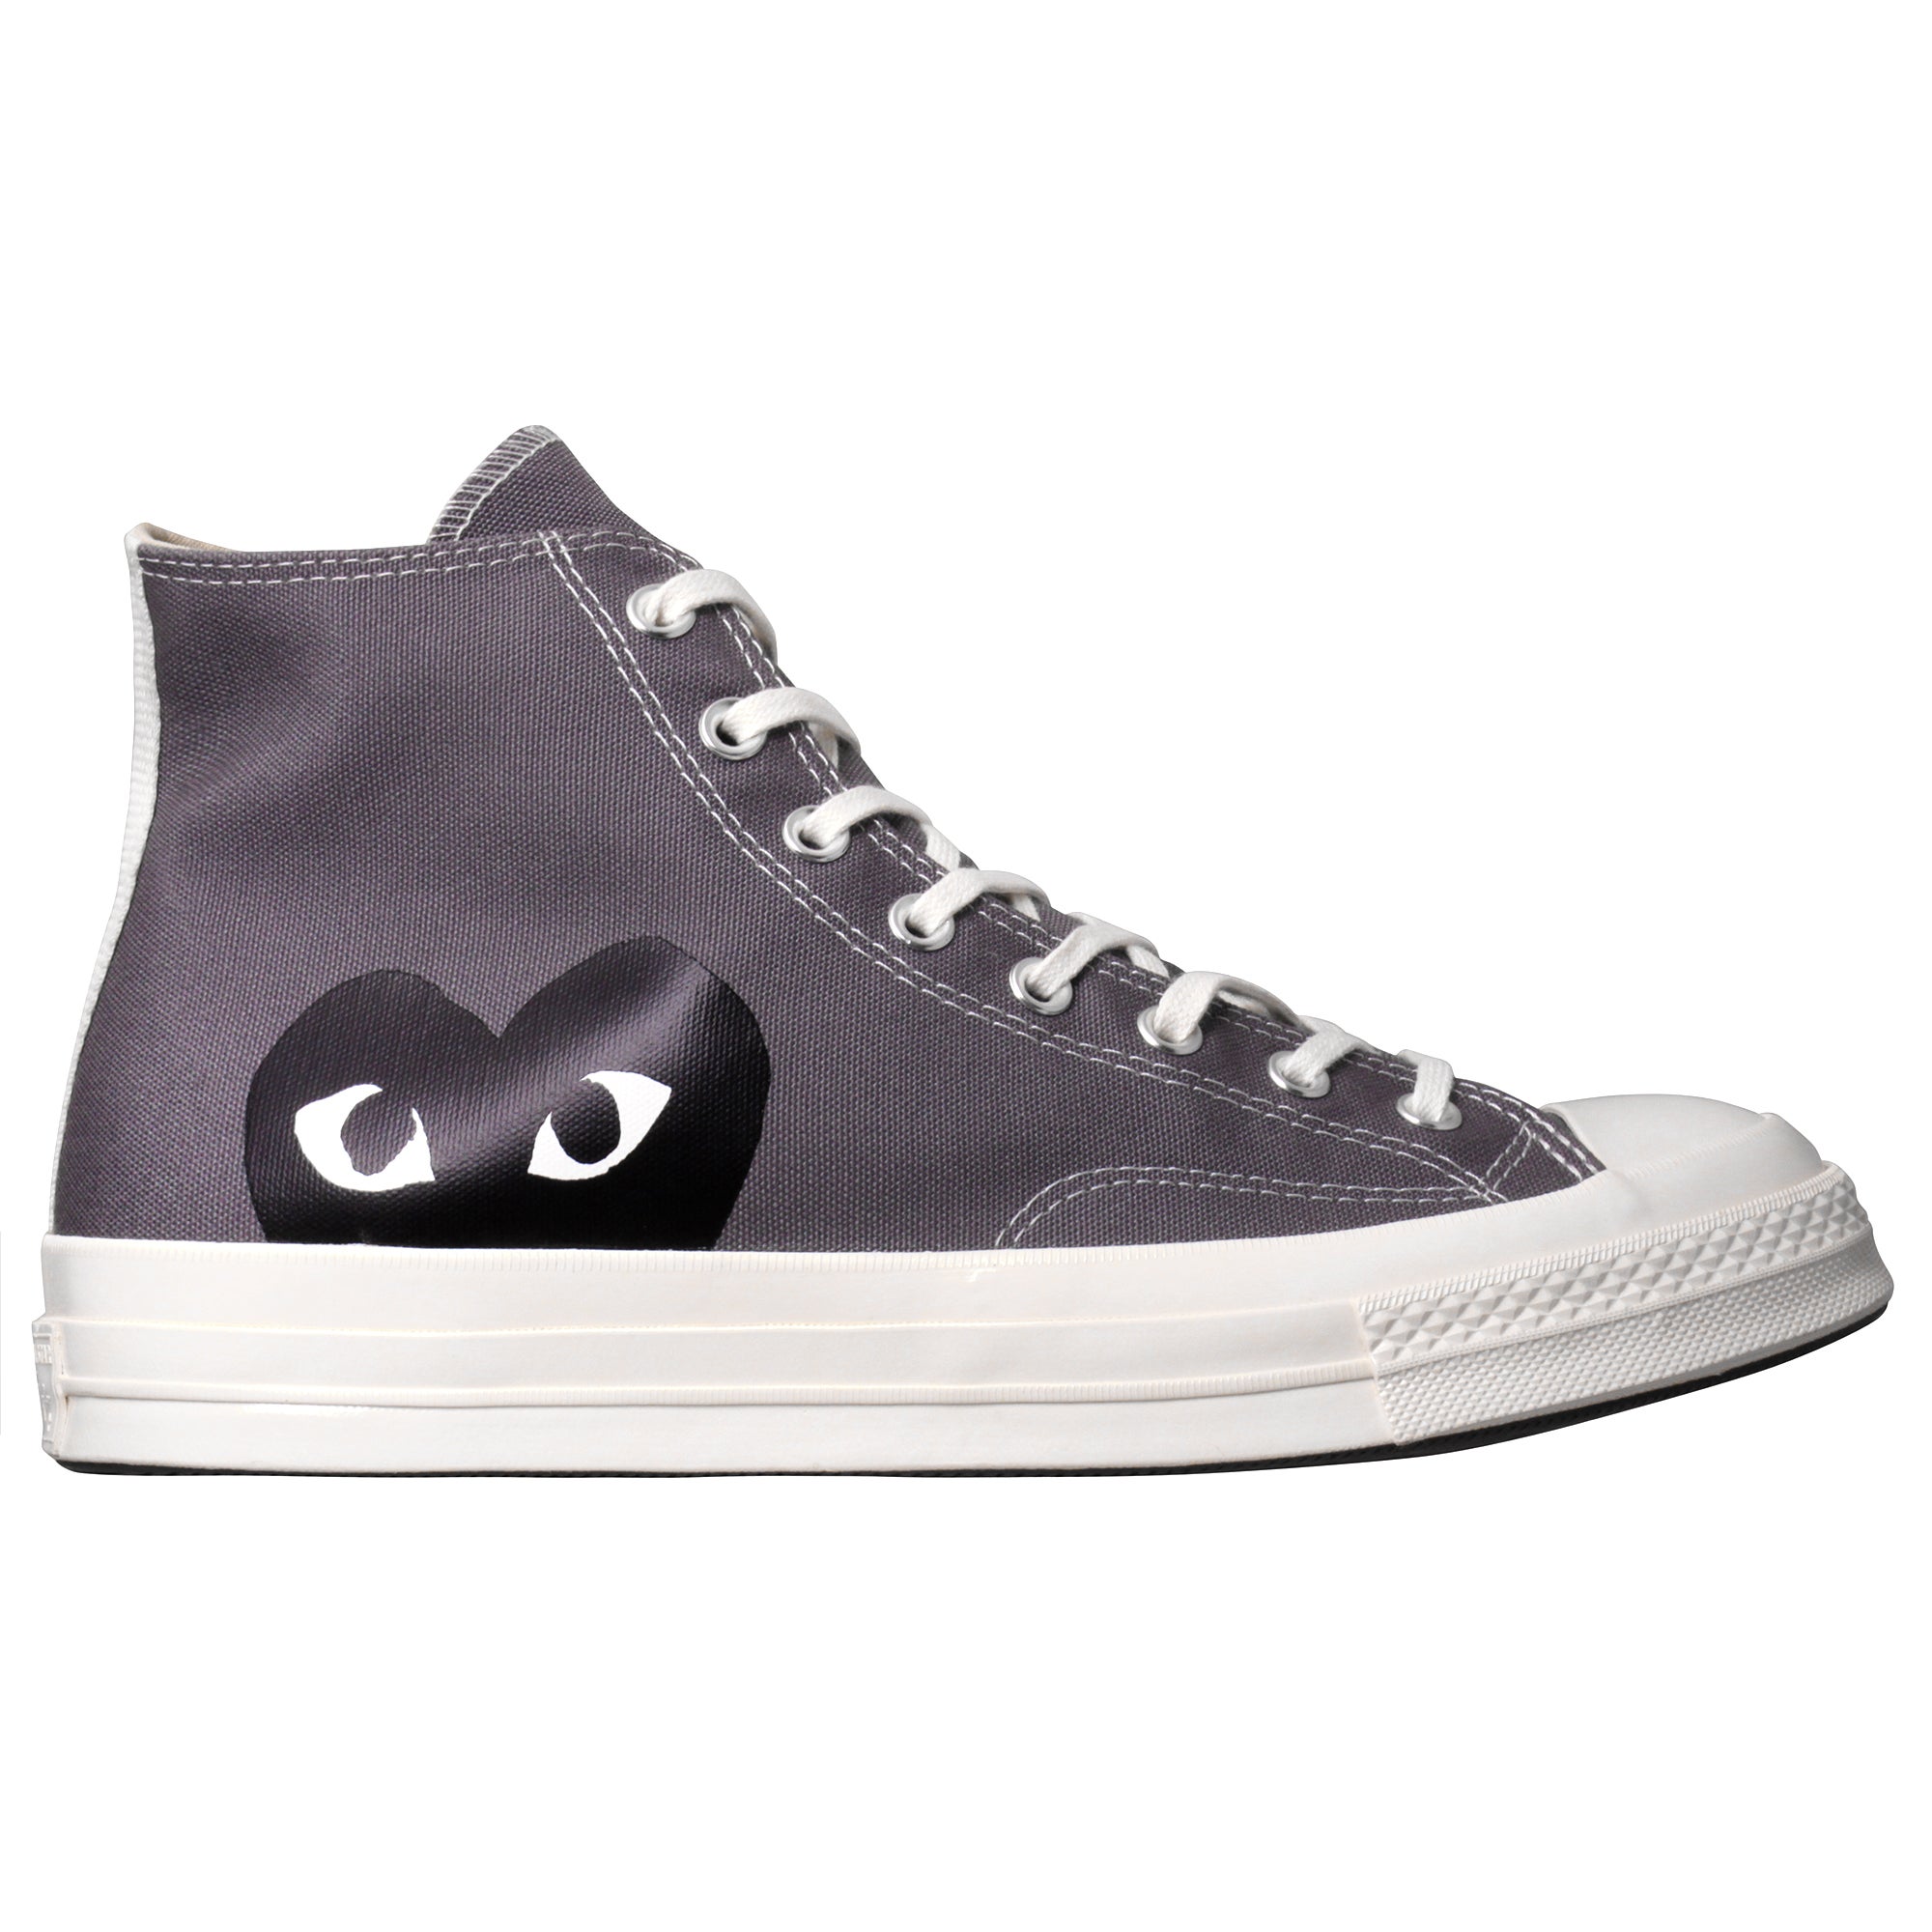 Converse x Comme Des Garcons PLAY All Star Chuck '70 Hi Unisex Sneakers Grey (US 6-12)